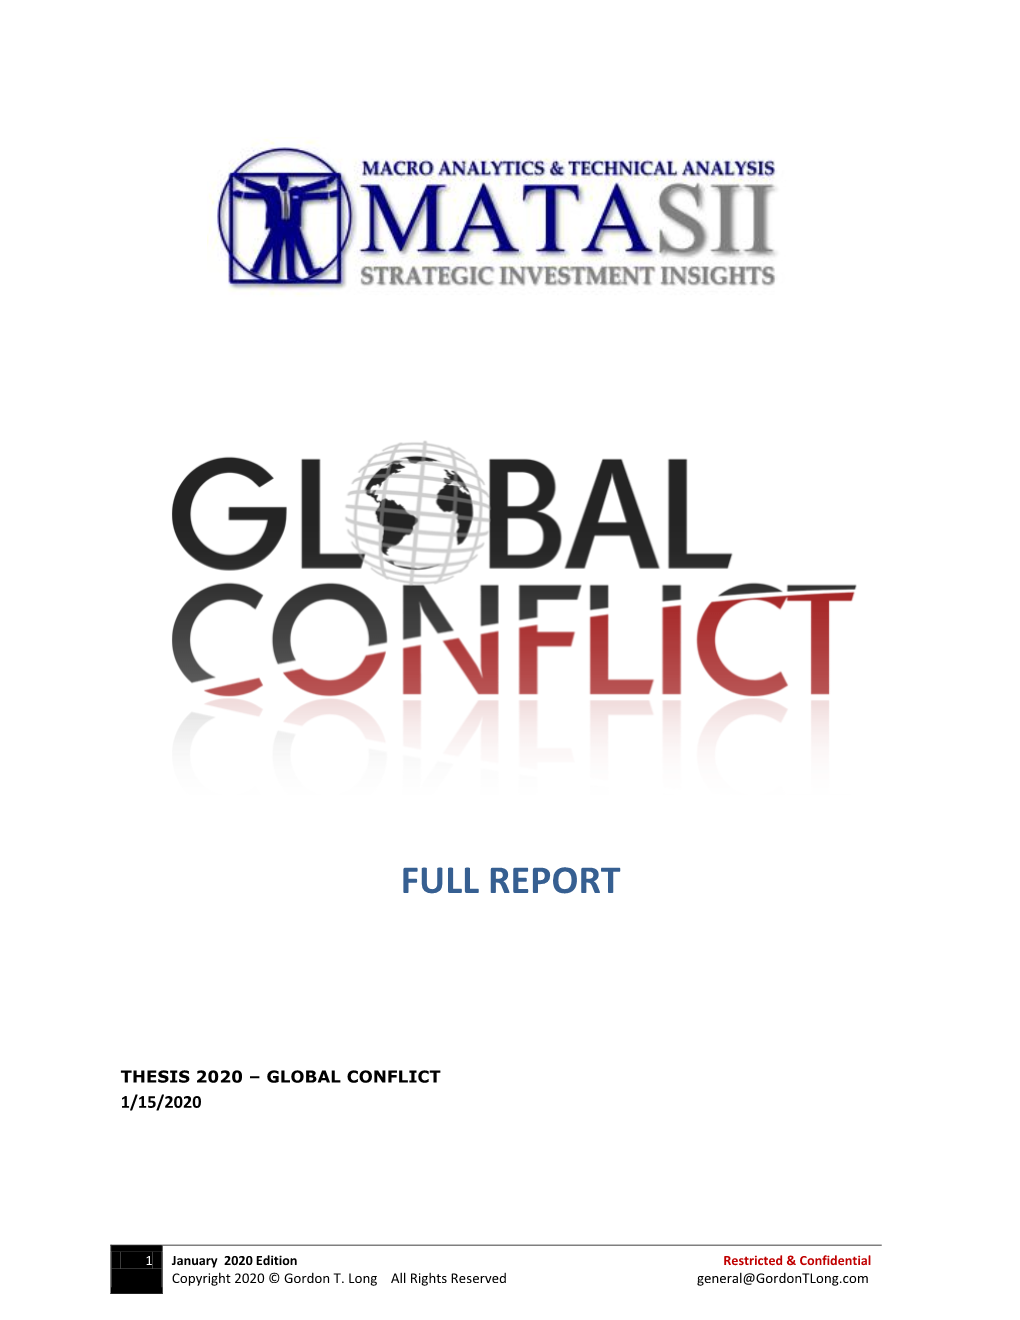 Global Conflict 1/15/2020